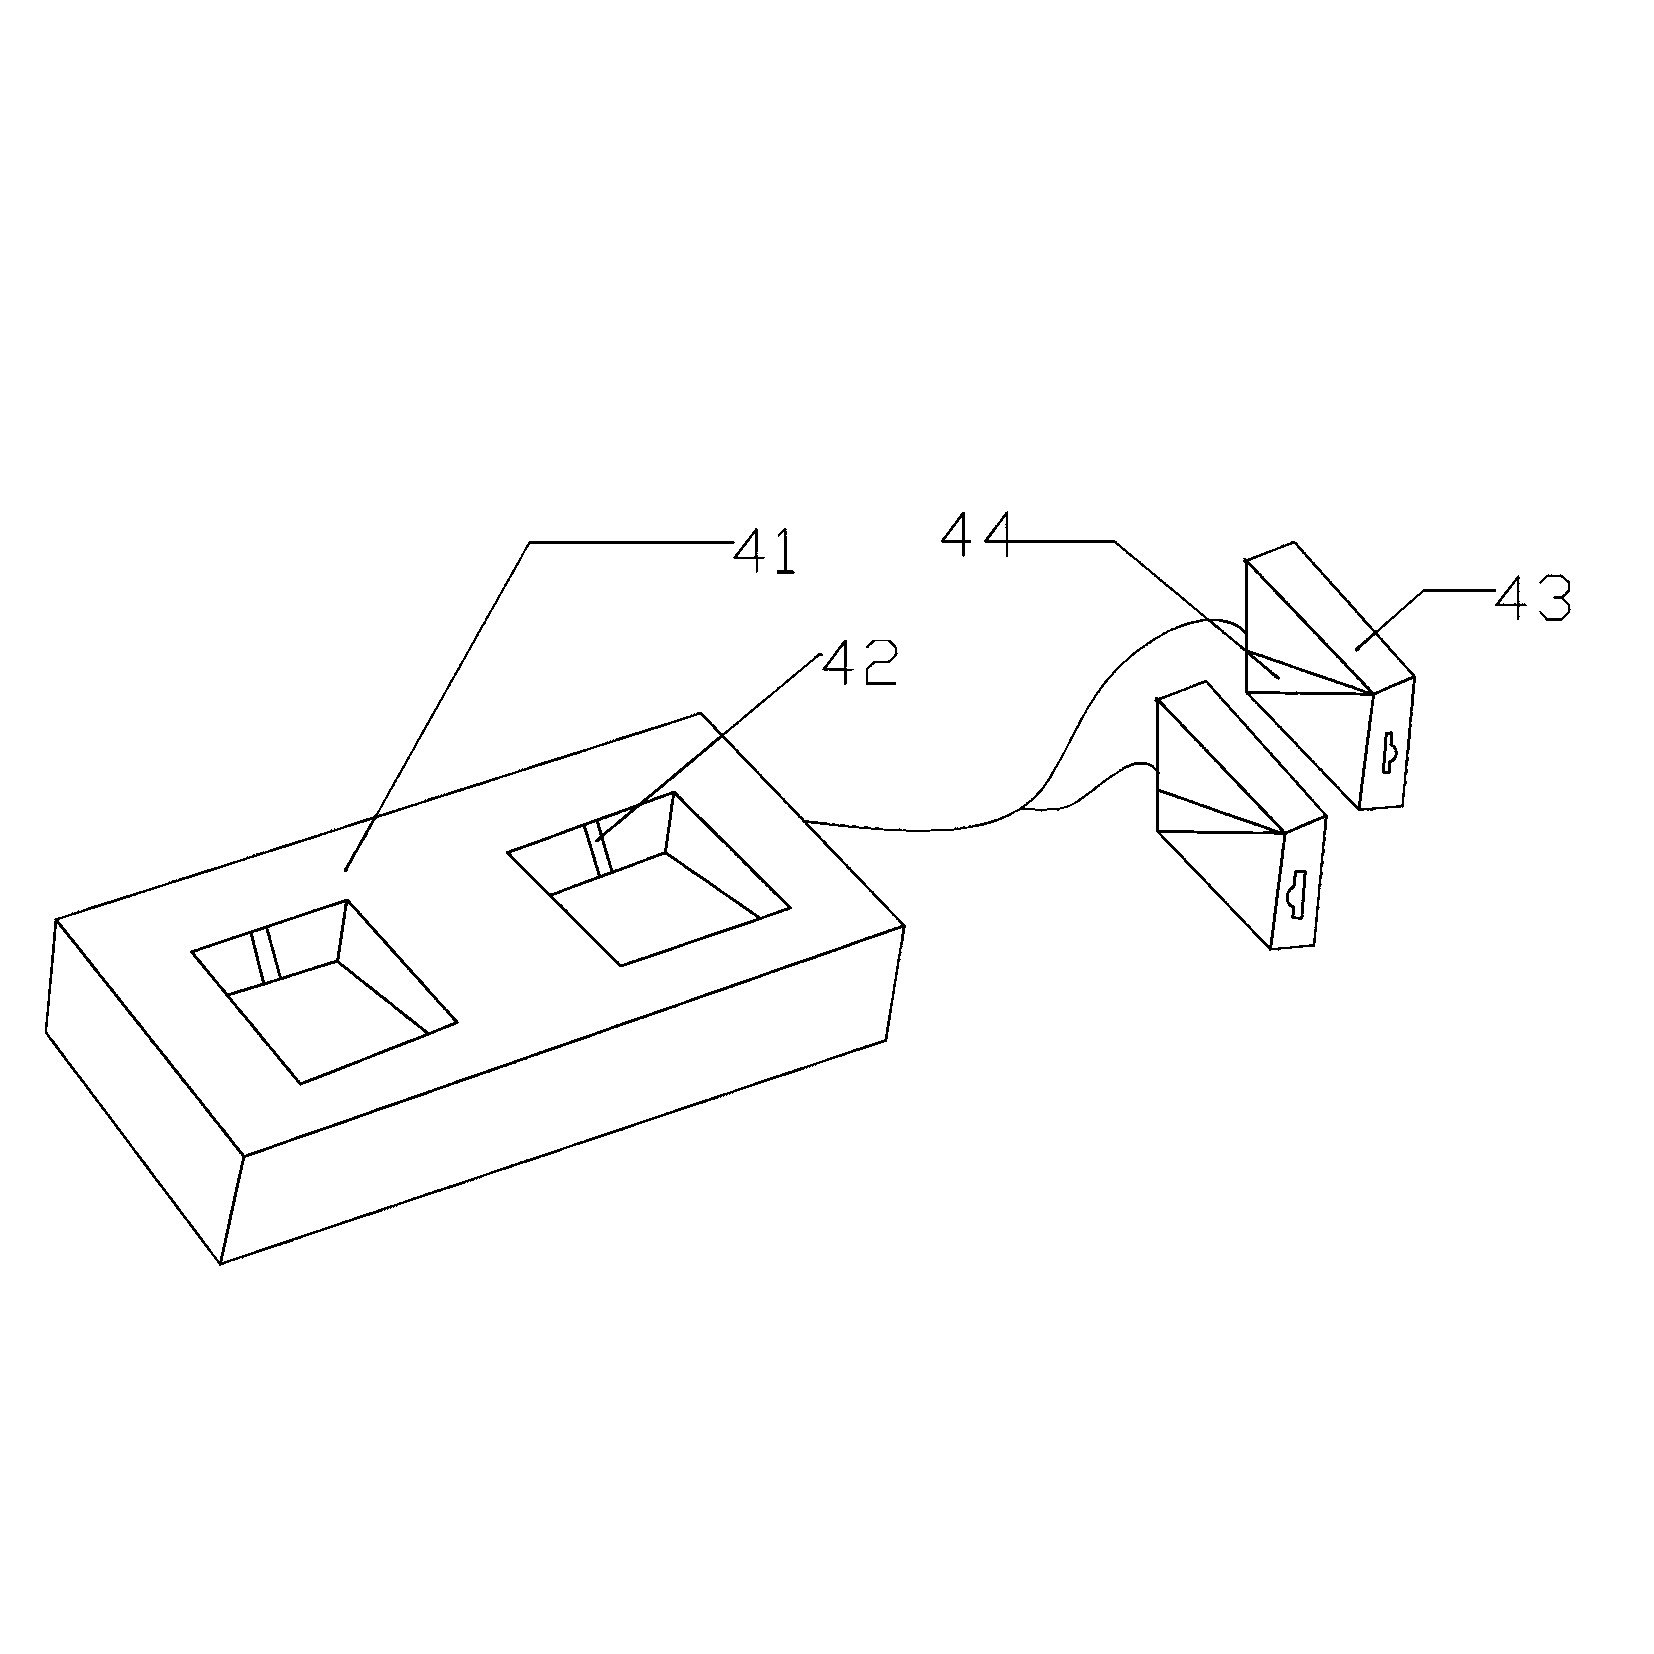 Intelligent socket capable of controlling turning-on and turning-off of socket